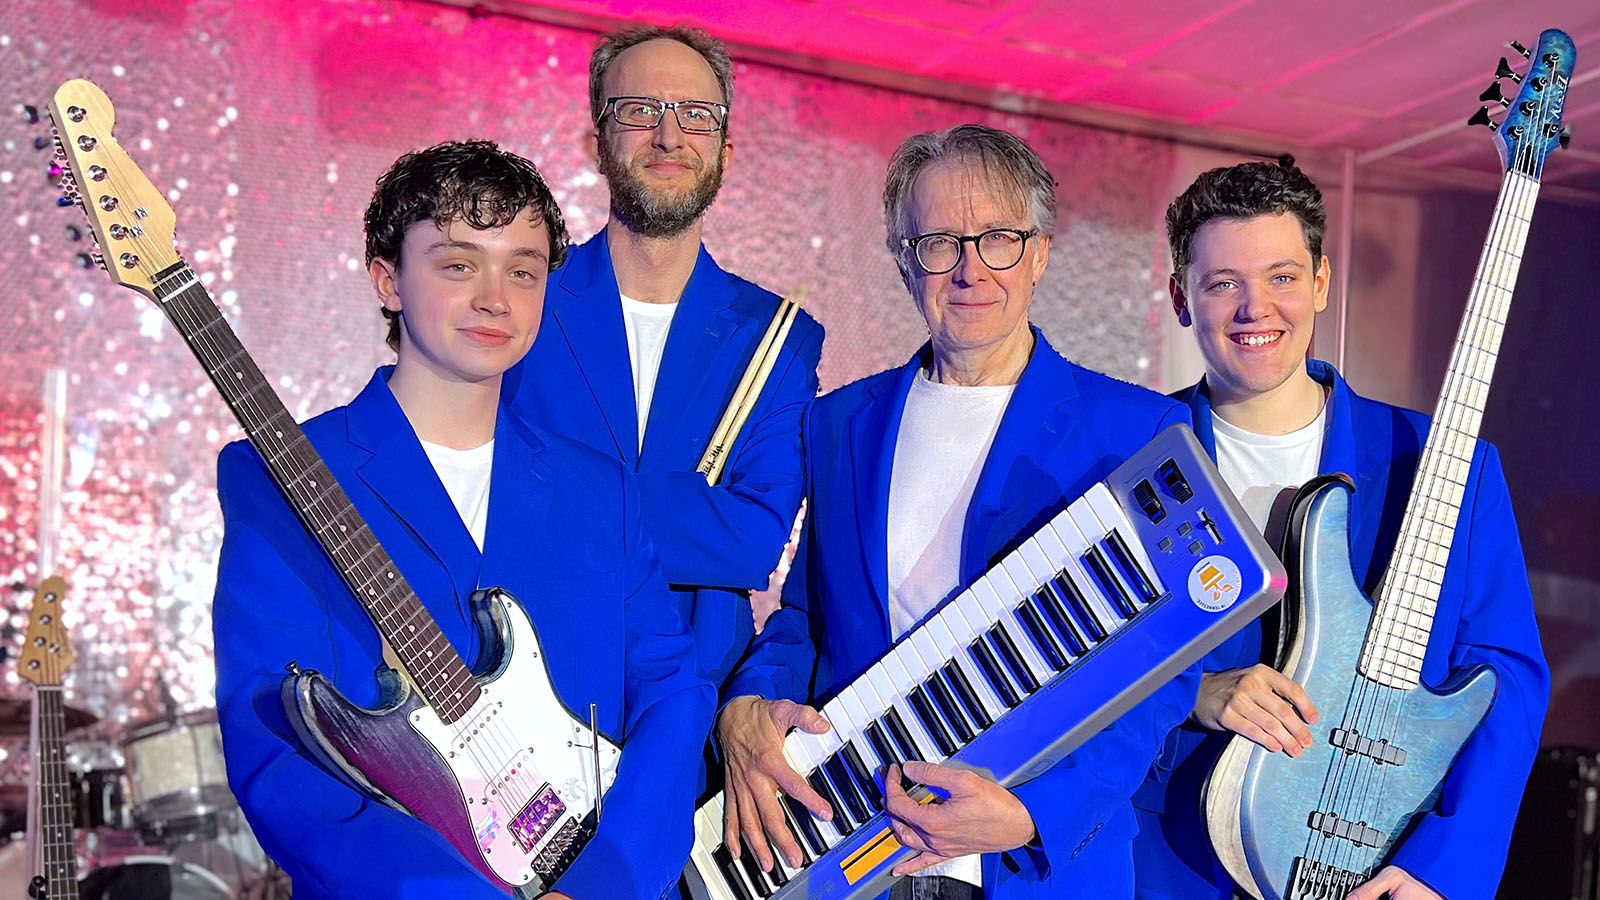 Summit City Music Theatre is using a live band, from left, Tyler Crisp, Carl Bleke, music director Rolin Mains, and Trevor Perkins, for The Wedding Singer, which continues this weekend.